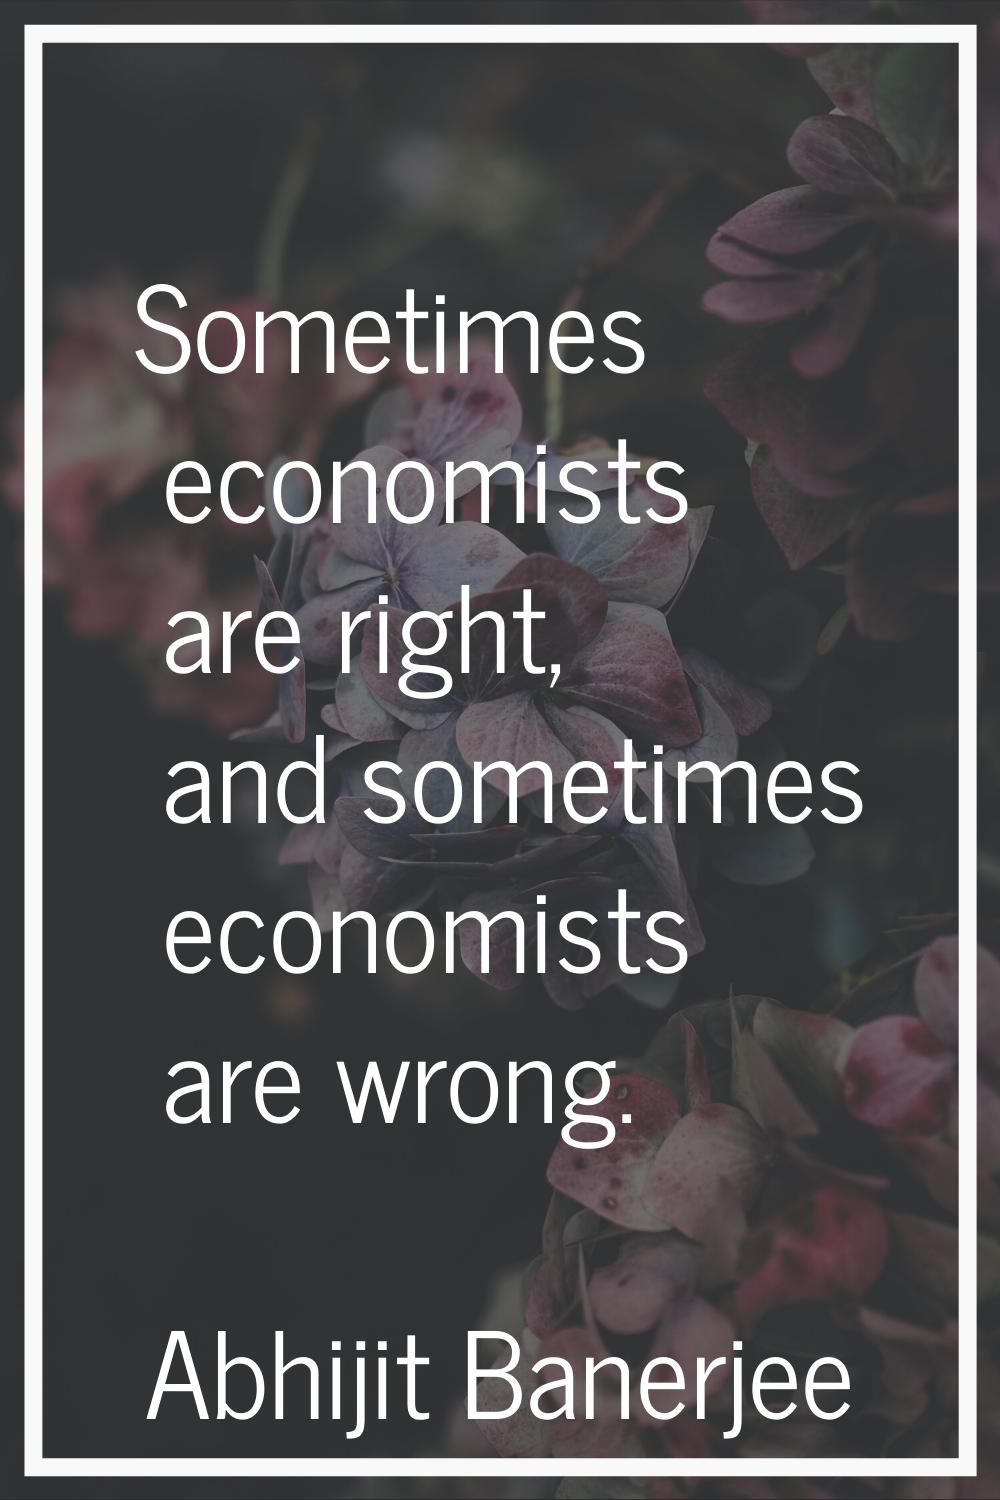 Sometimes economists are right, and sometimes economists are wrong.